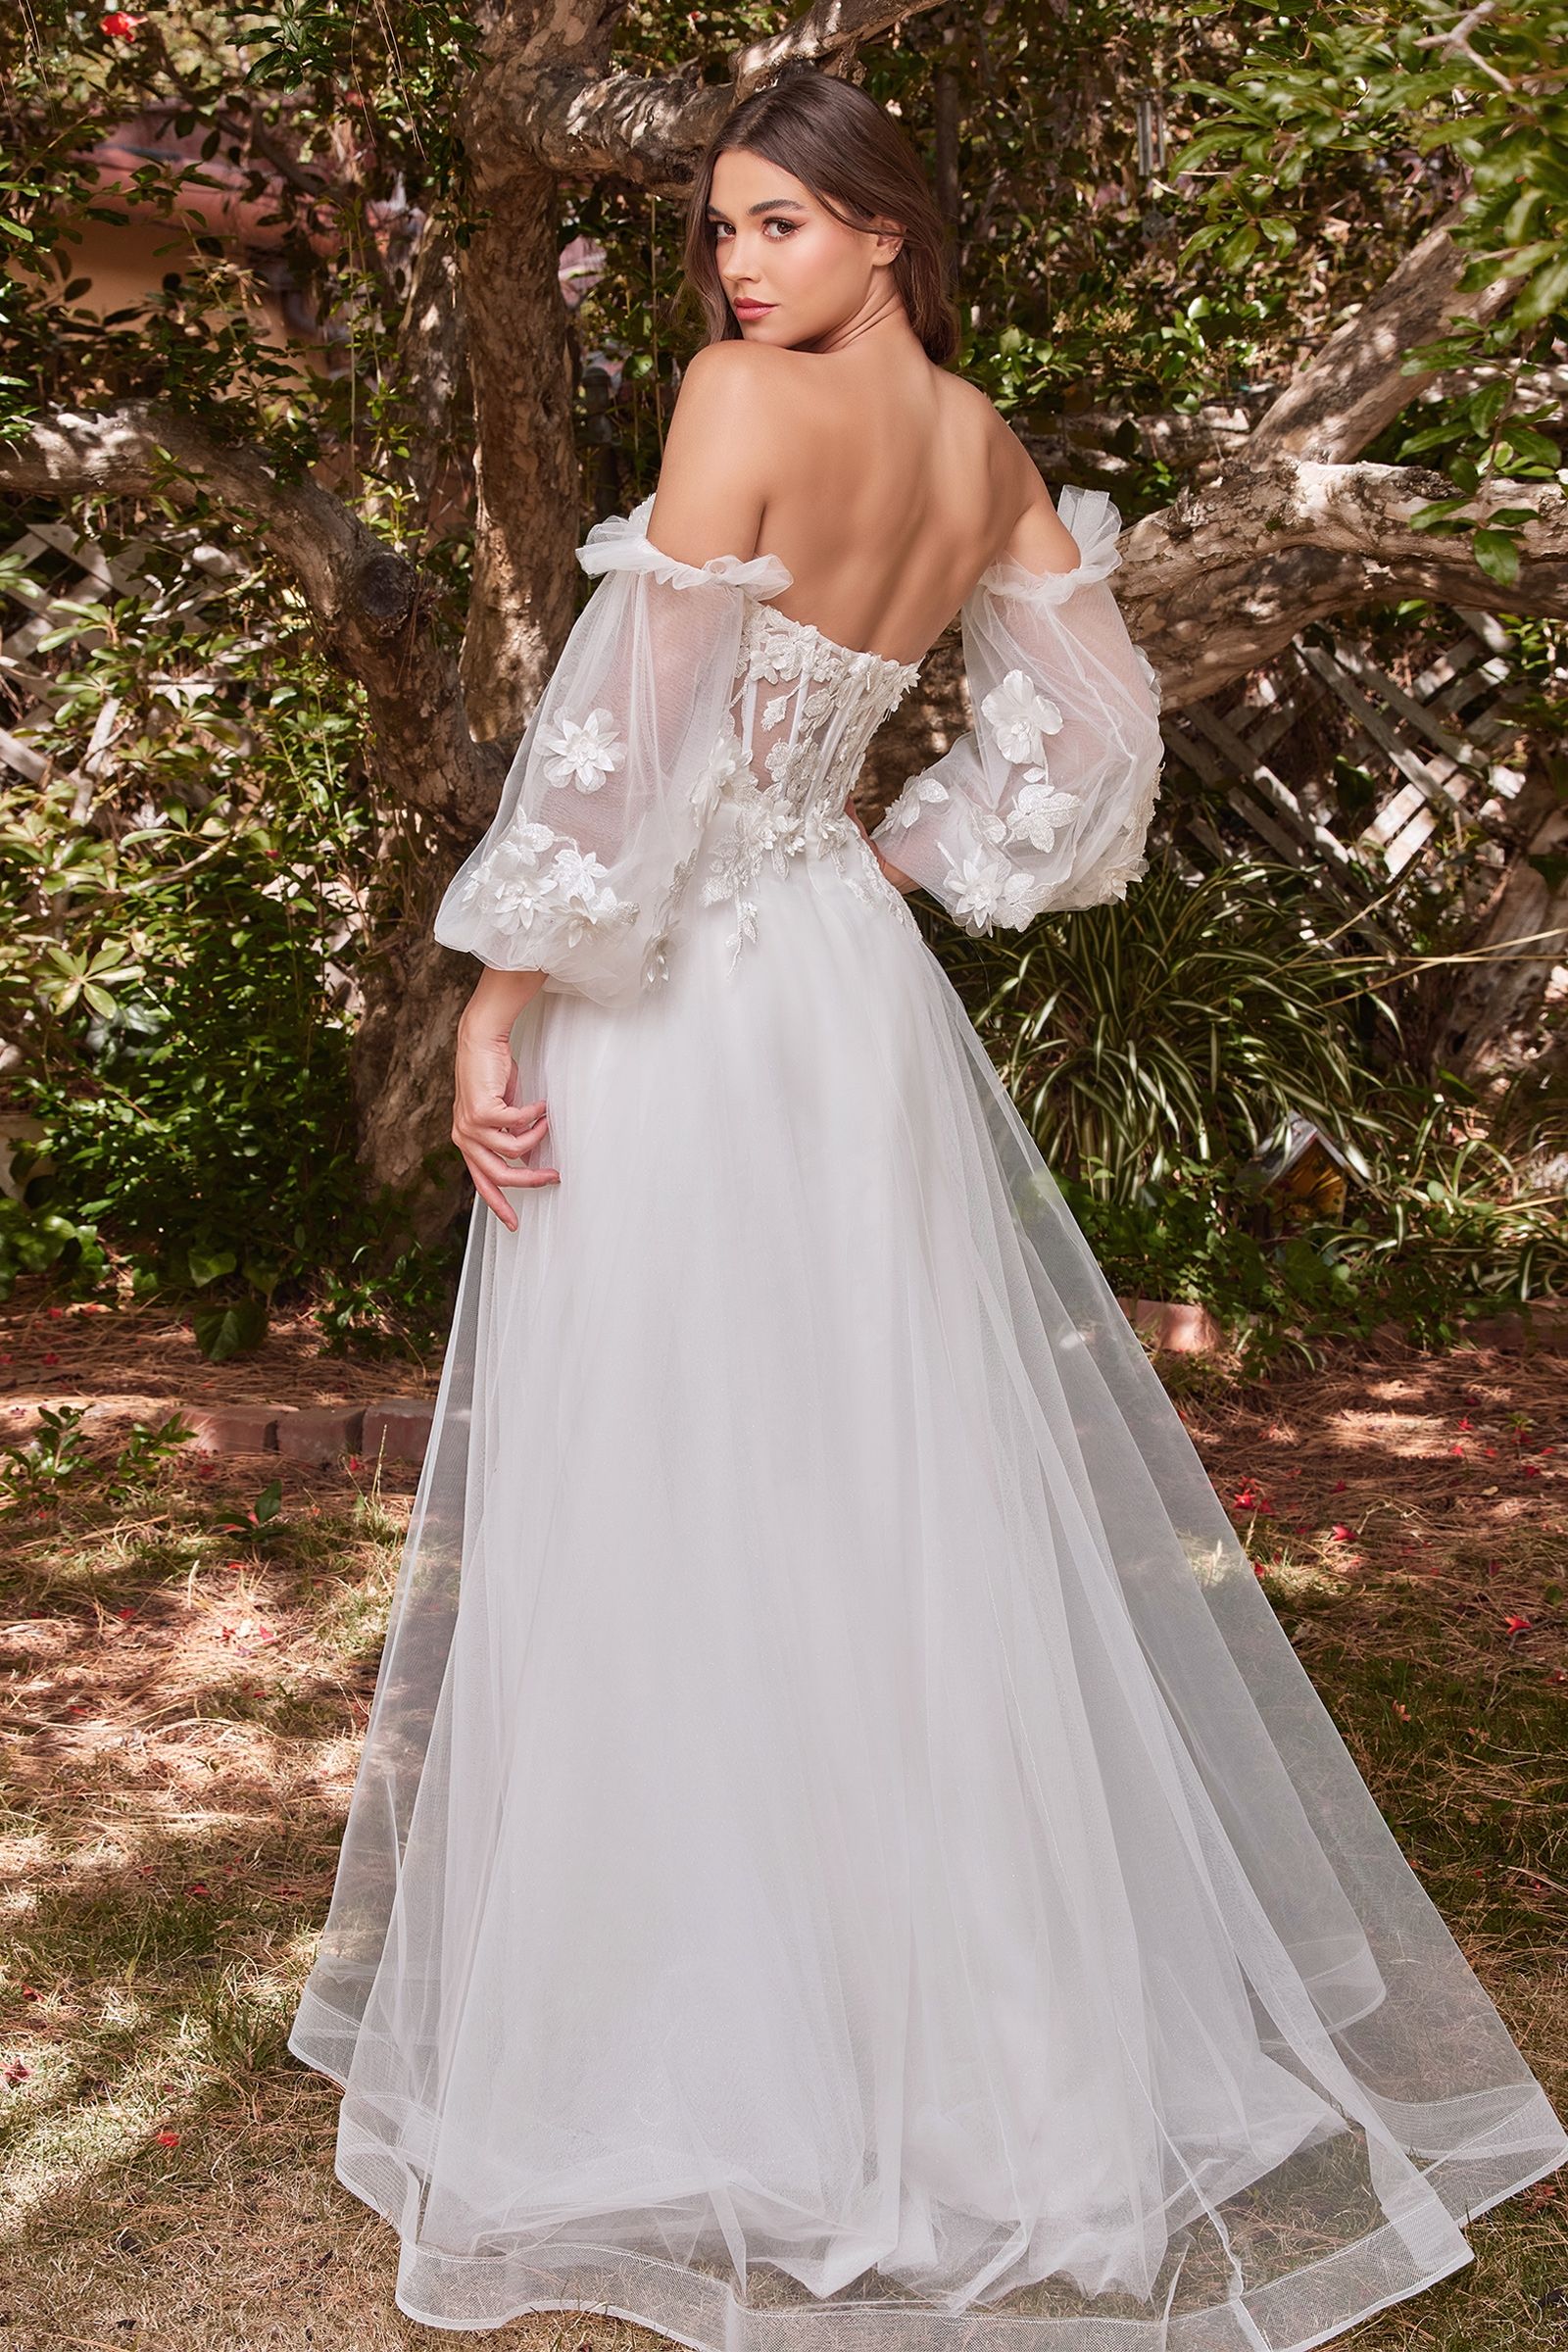 dreamy and elegant gown with tulle layers and thoughtful design elements